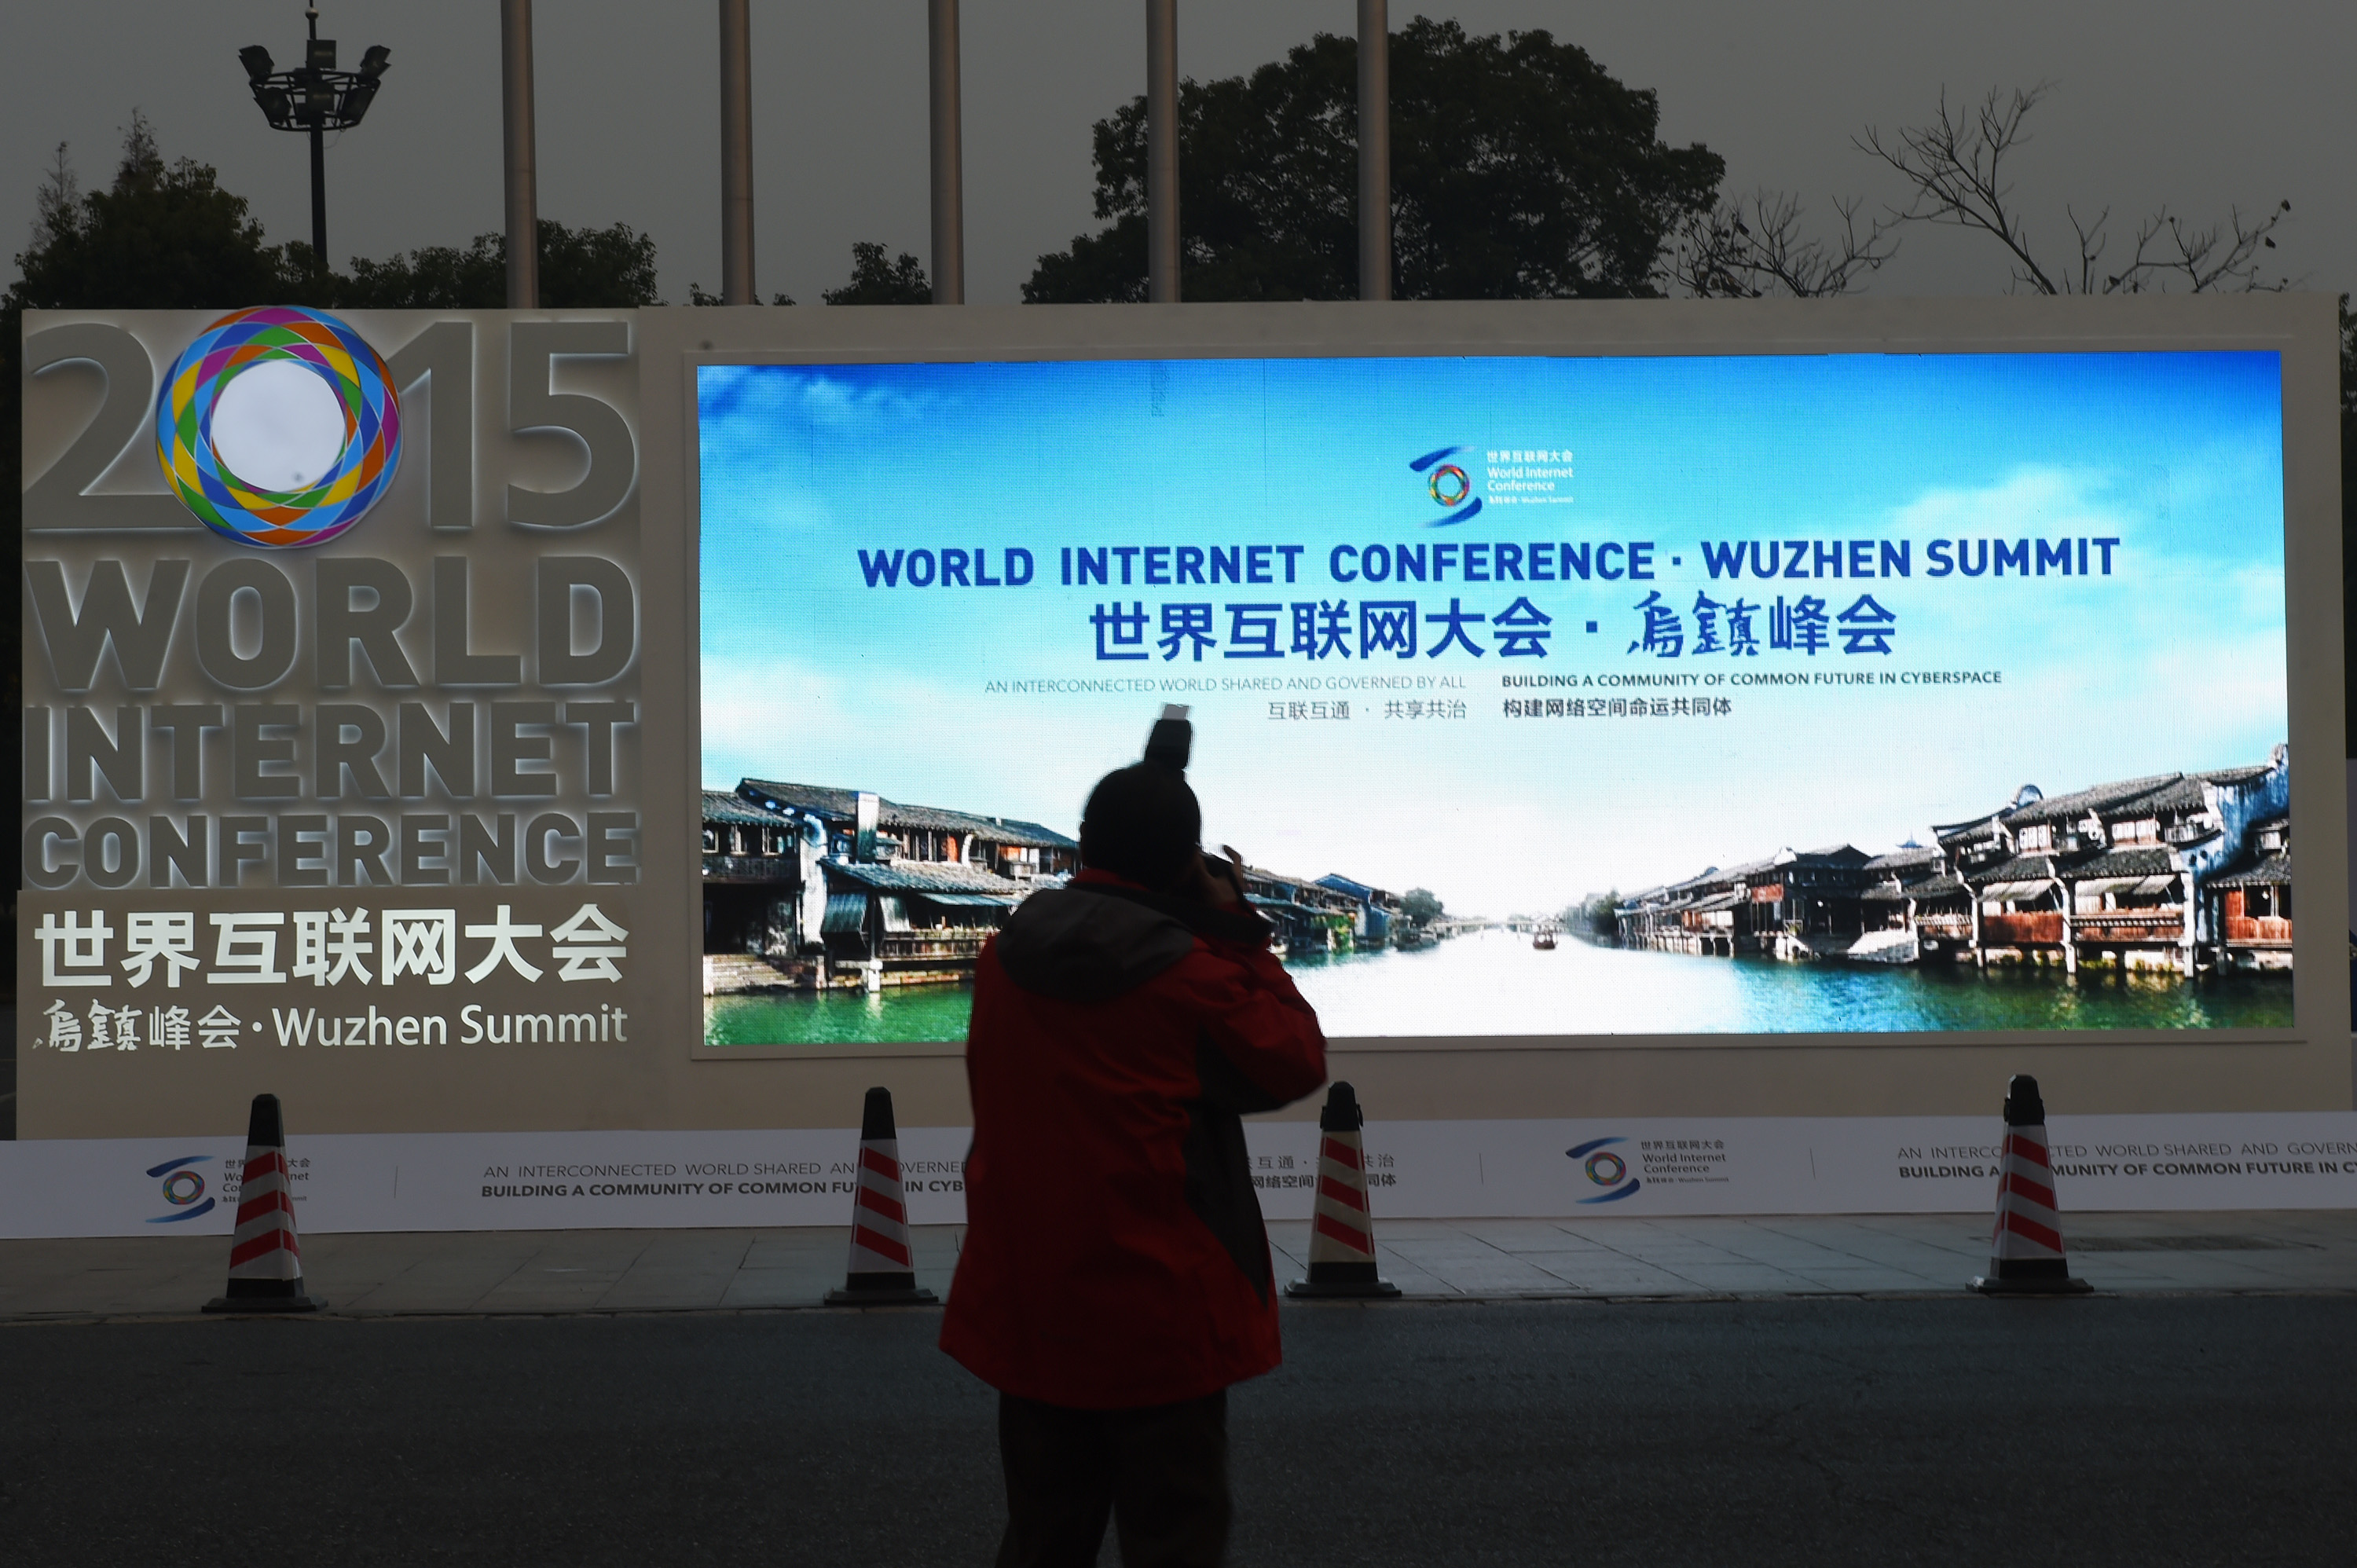 (151215) -- TONGXIANG, Dec. 15, 2015 (Xinhua) -- Photo taken on Dec. 14, 2015 shows exterior scene of the main conference hall of the second World Internet Conference in Wuzhen, east China's Zhejiang Province. The second World Internet Conference will be held in Wuzhen from Dec. 16 to 18. (Xinhua/Huang Zongzhi)(mcg)